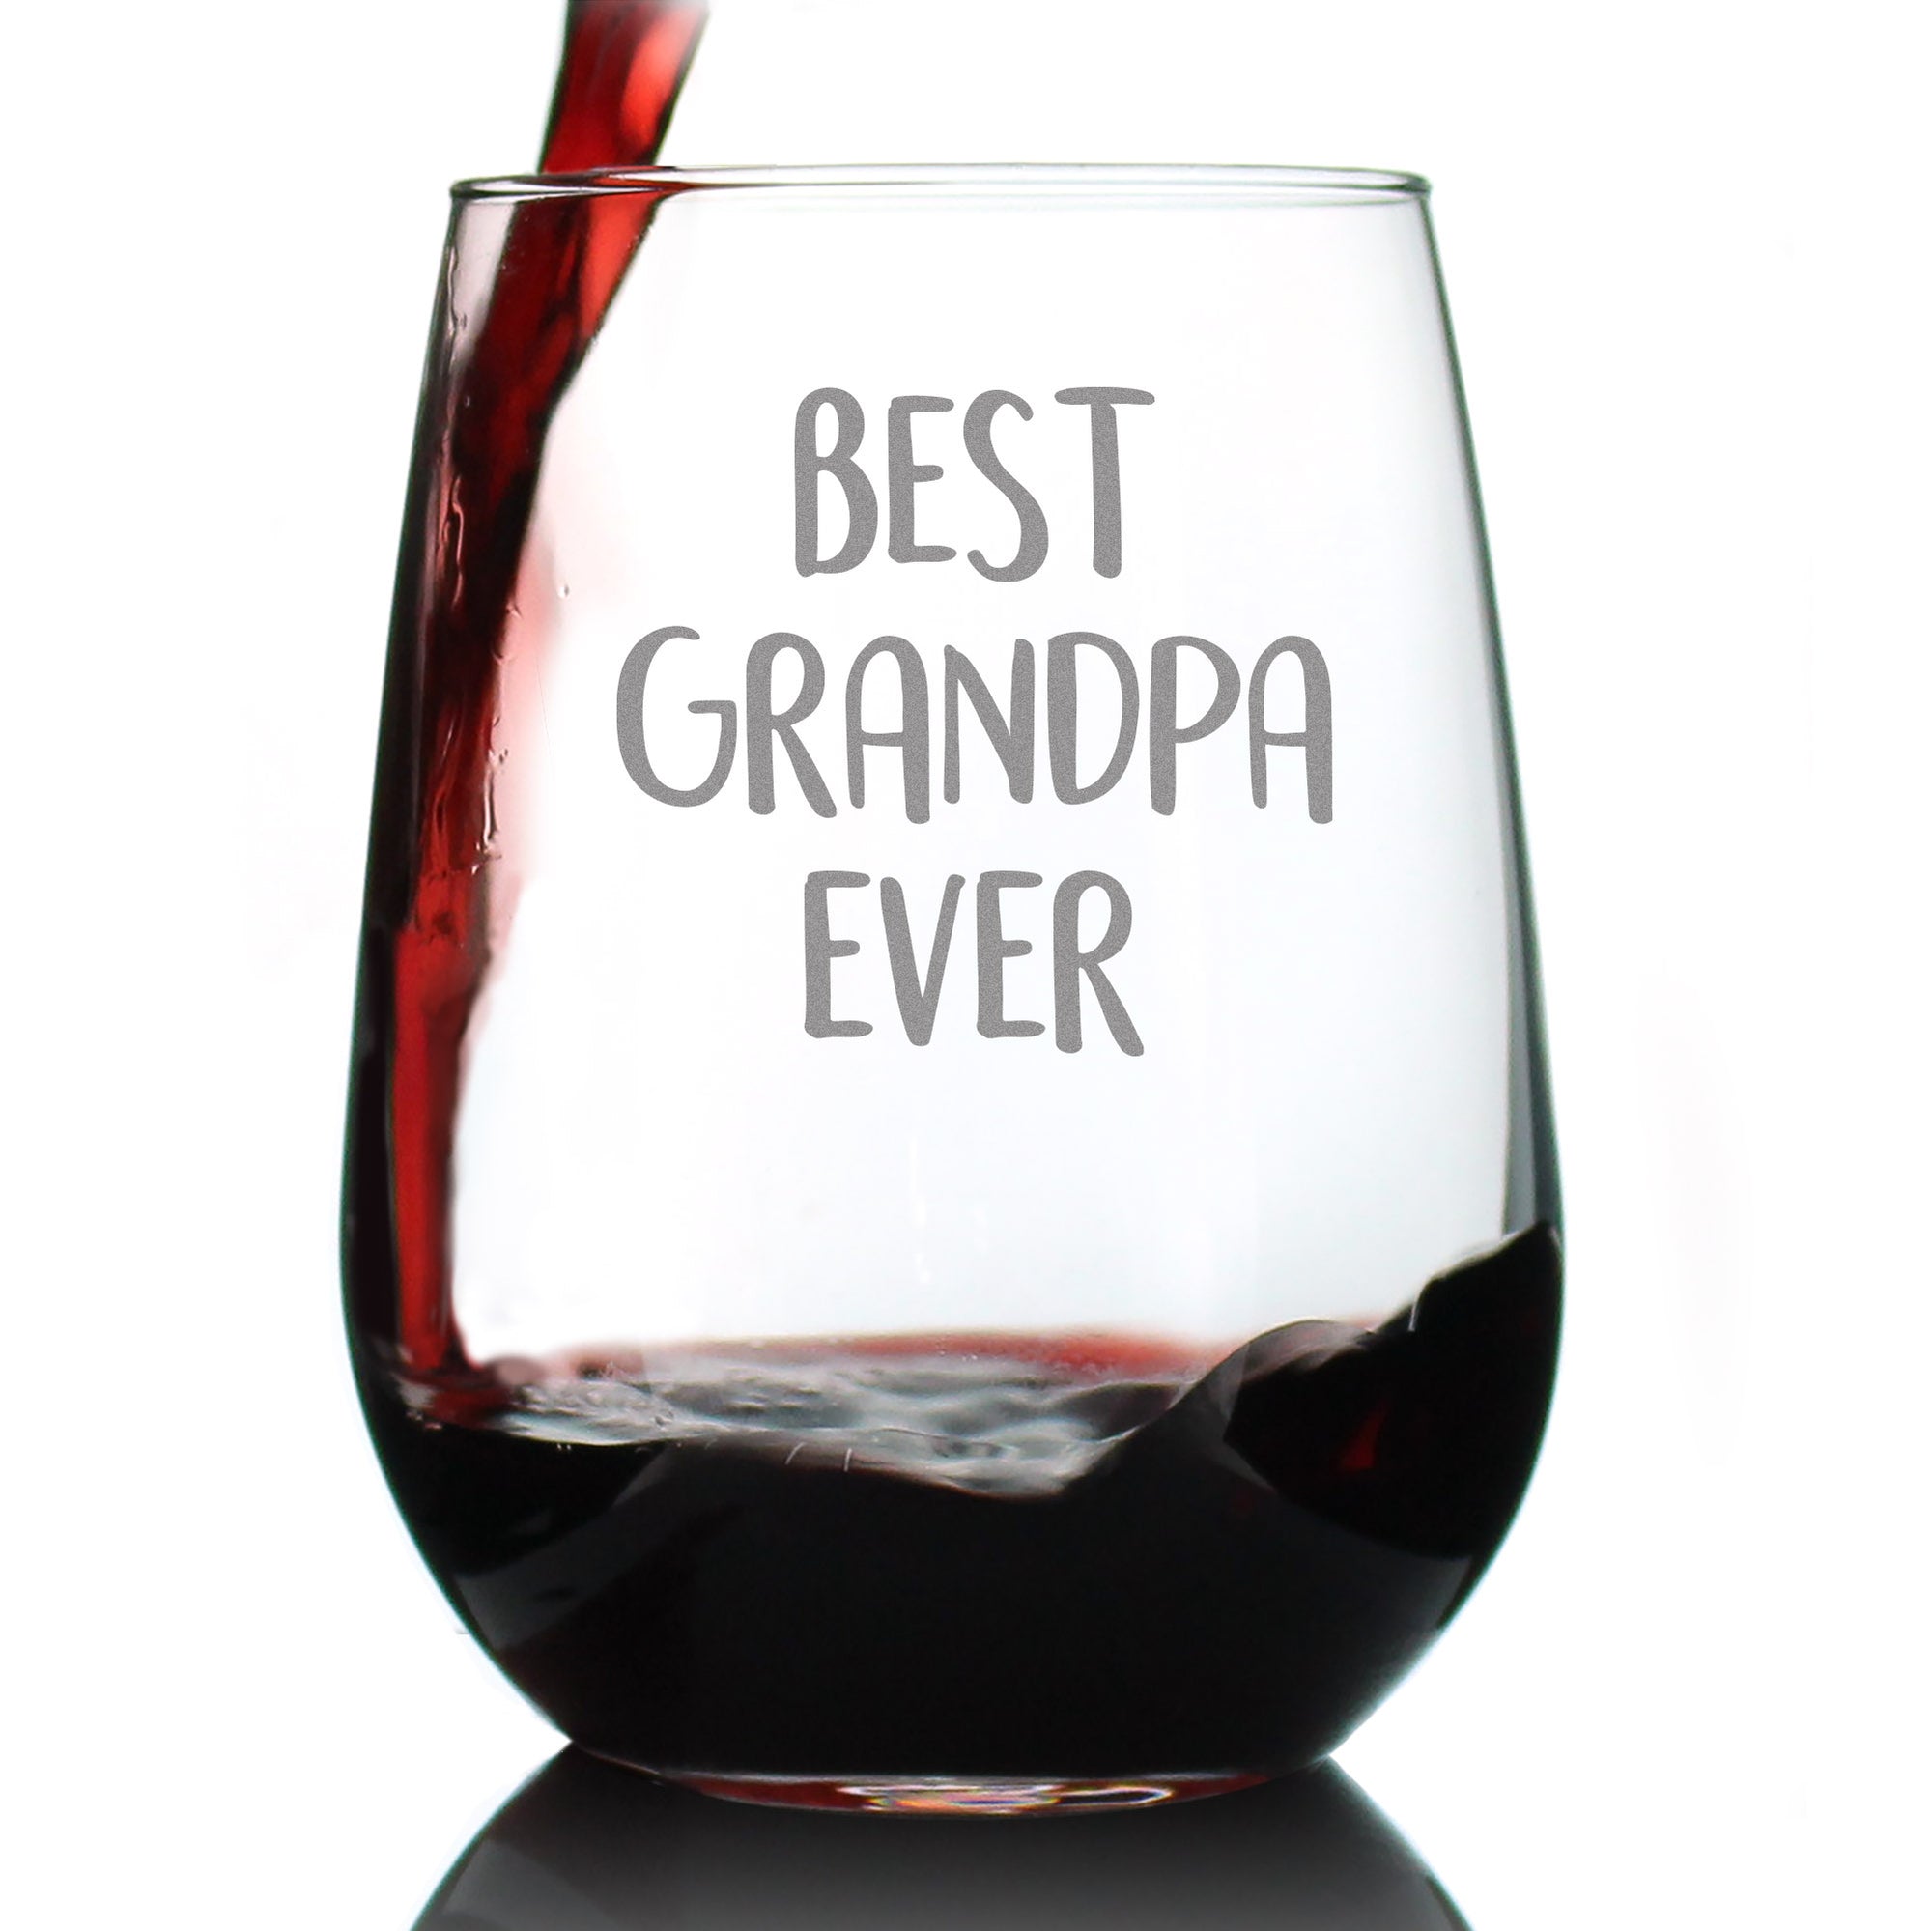 Best Grandpa Ever - Stemless Wine Glass Gift for Grandfathers & Dads - Fun Birthday Glassware - Large Glasses